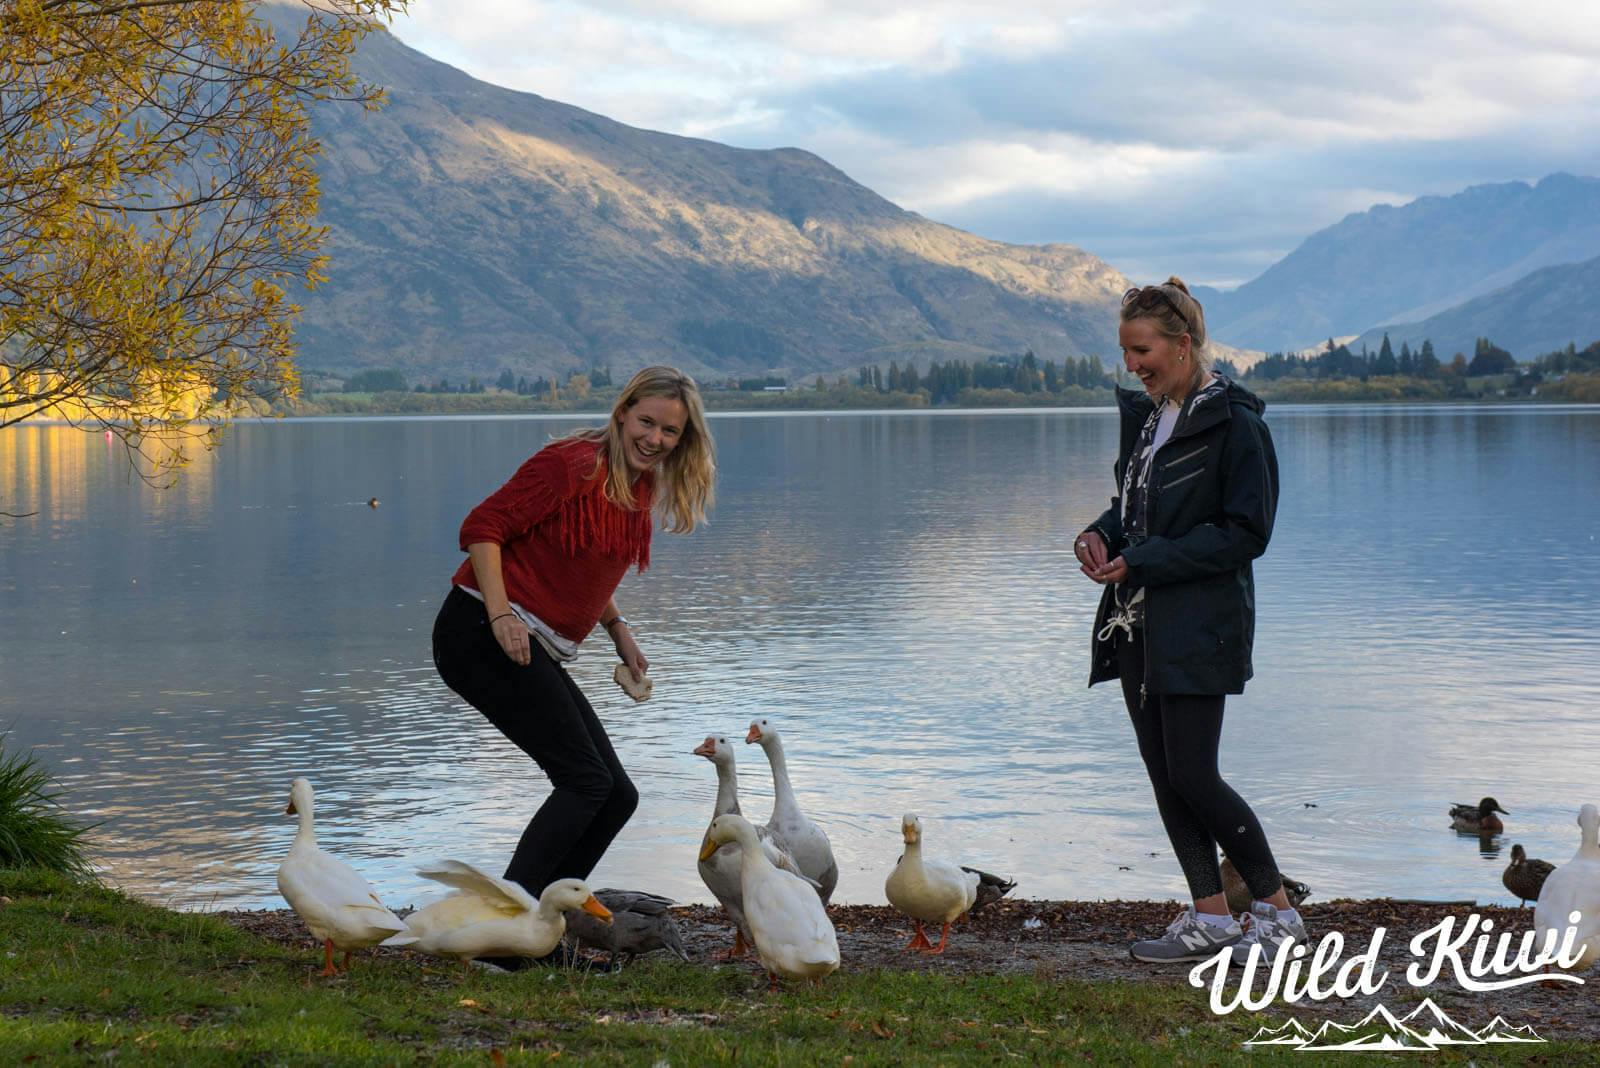 Head to New Zealand on a Wild Kiwi tour - Now is the time to travel!